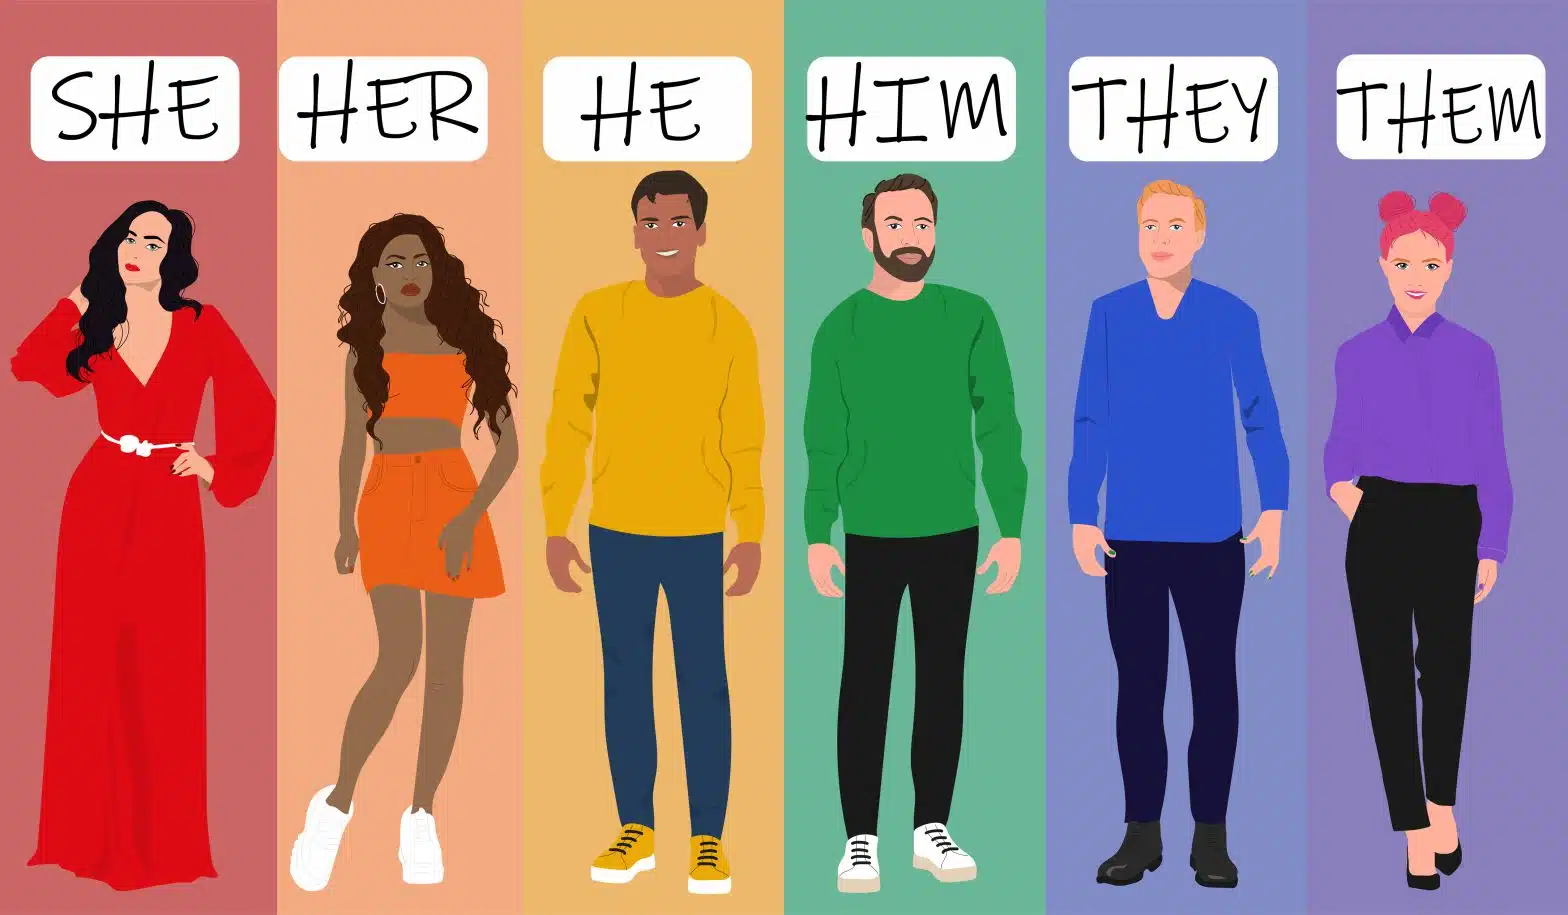 Why Are Pronouns Important in the Workplace?